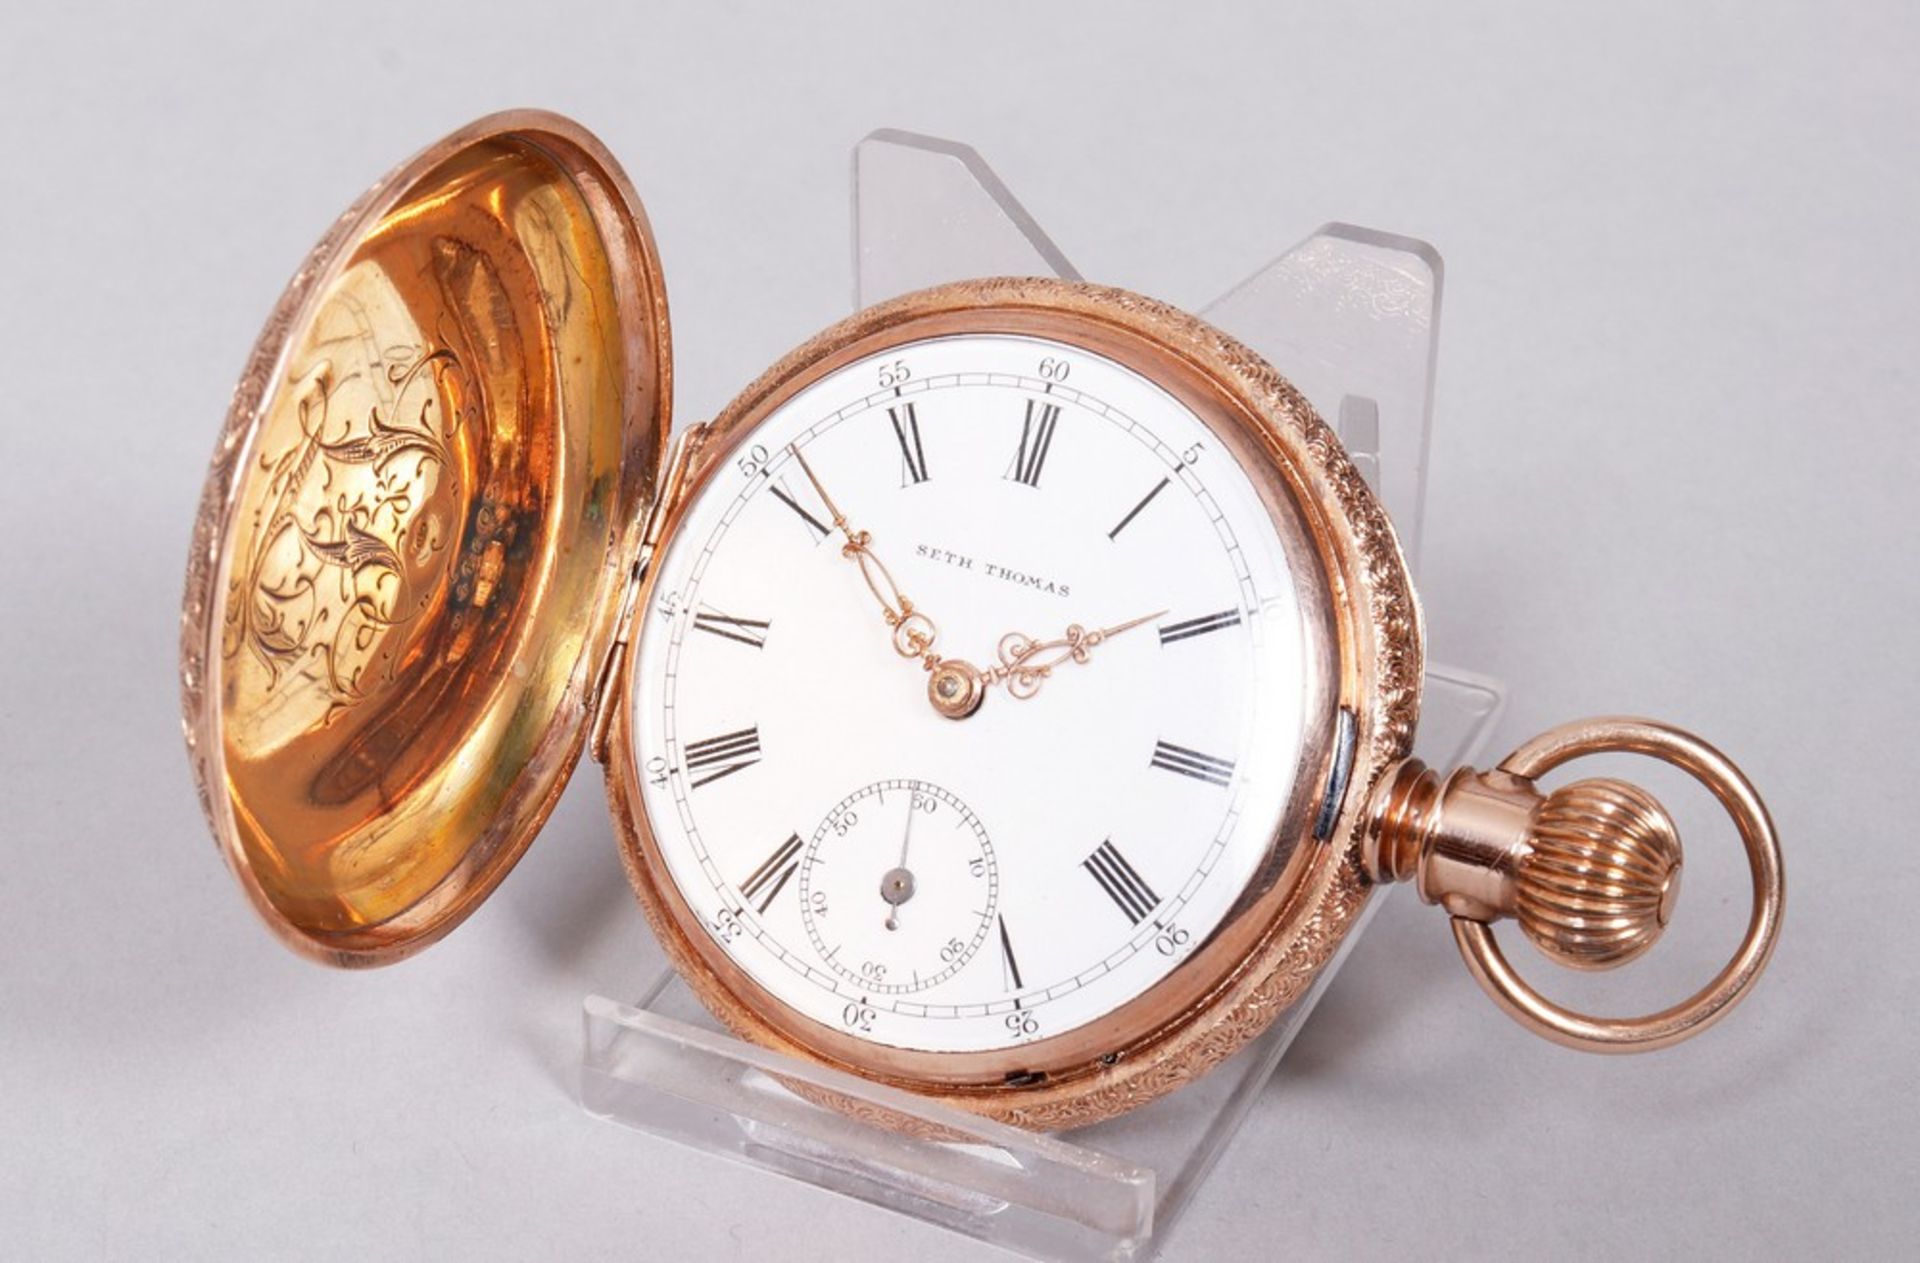 Very rare American pocket watch from 1894, Seth Thomas, Thomaston, Conn., made of 585 gold